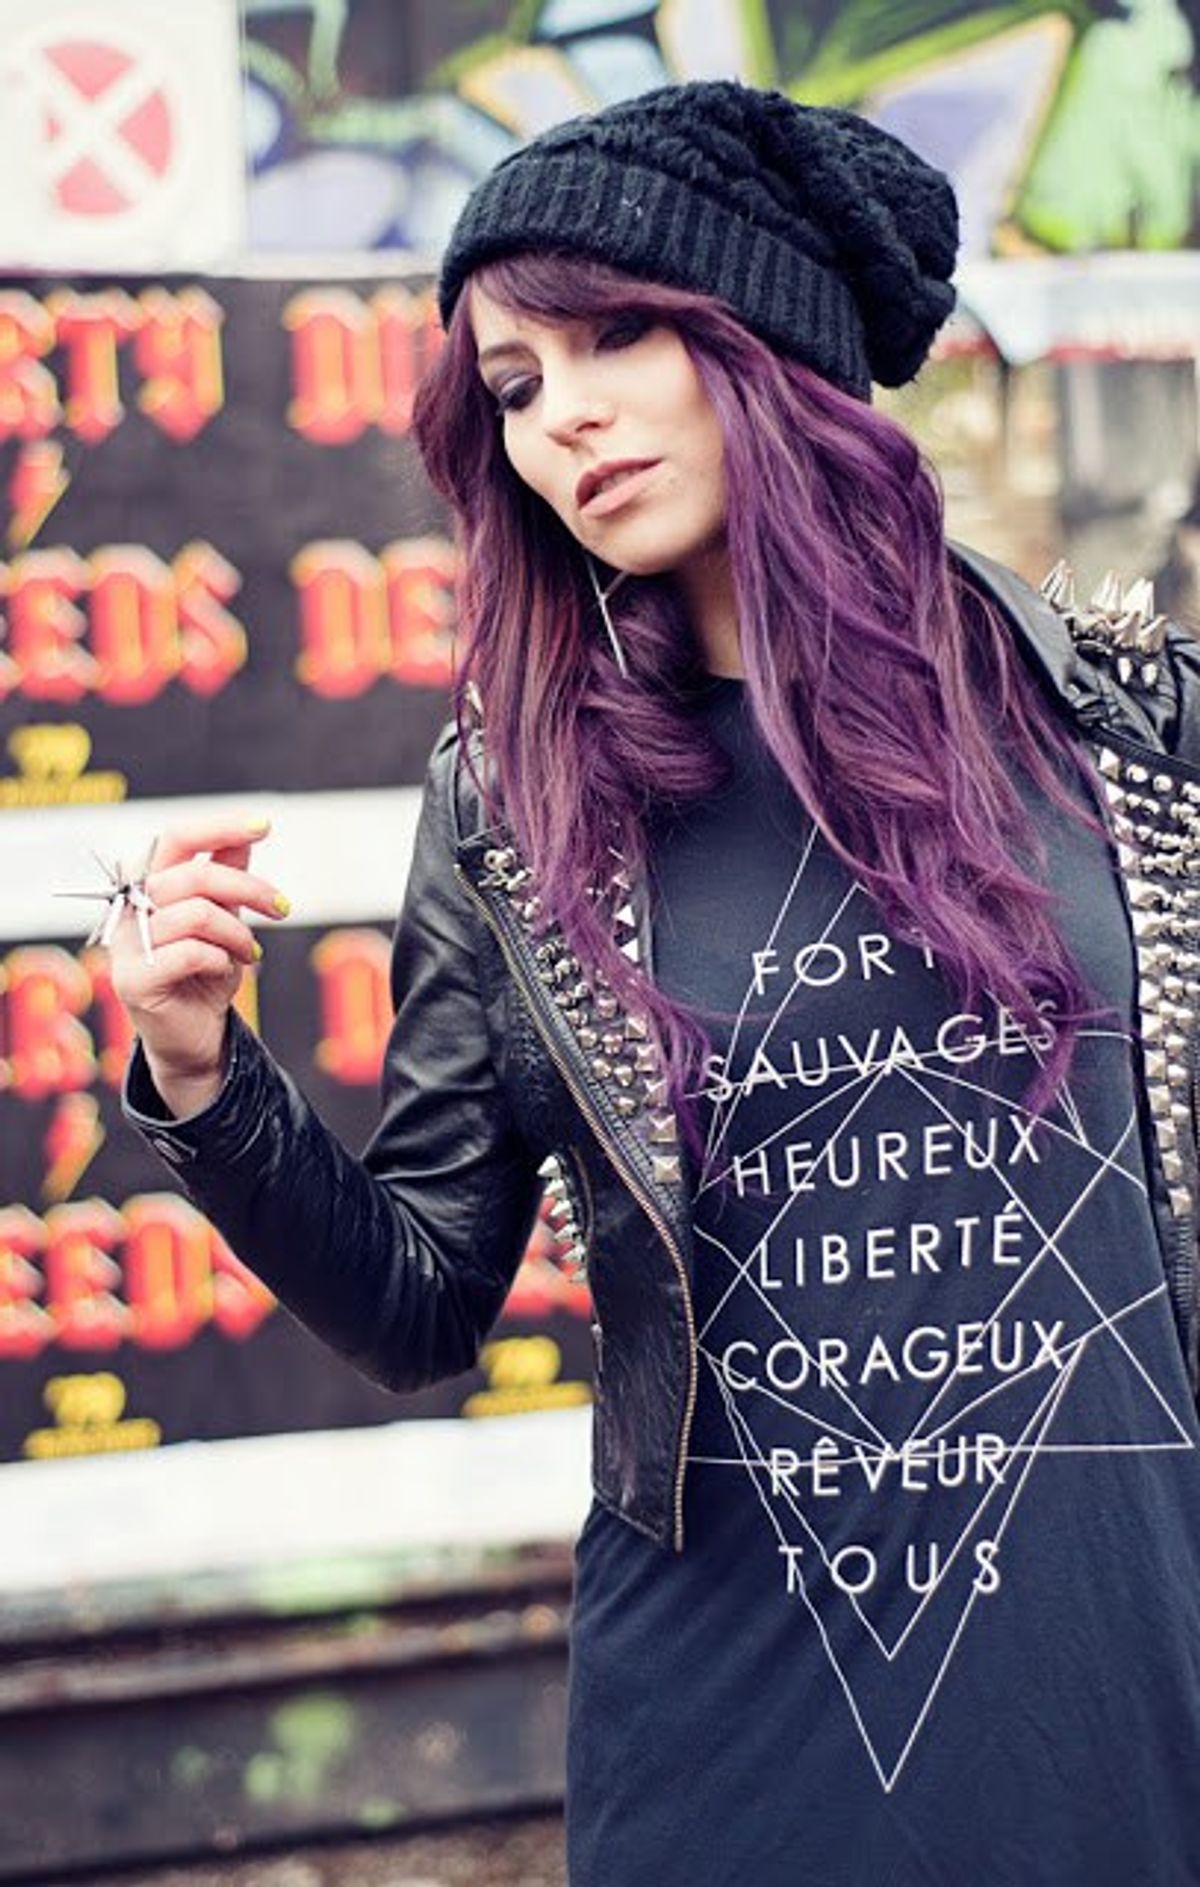 10 Things I Learned About Myself and Society When I Dyed My Hair Purple